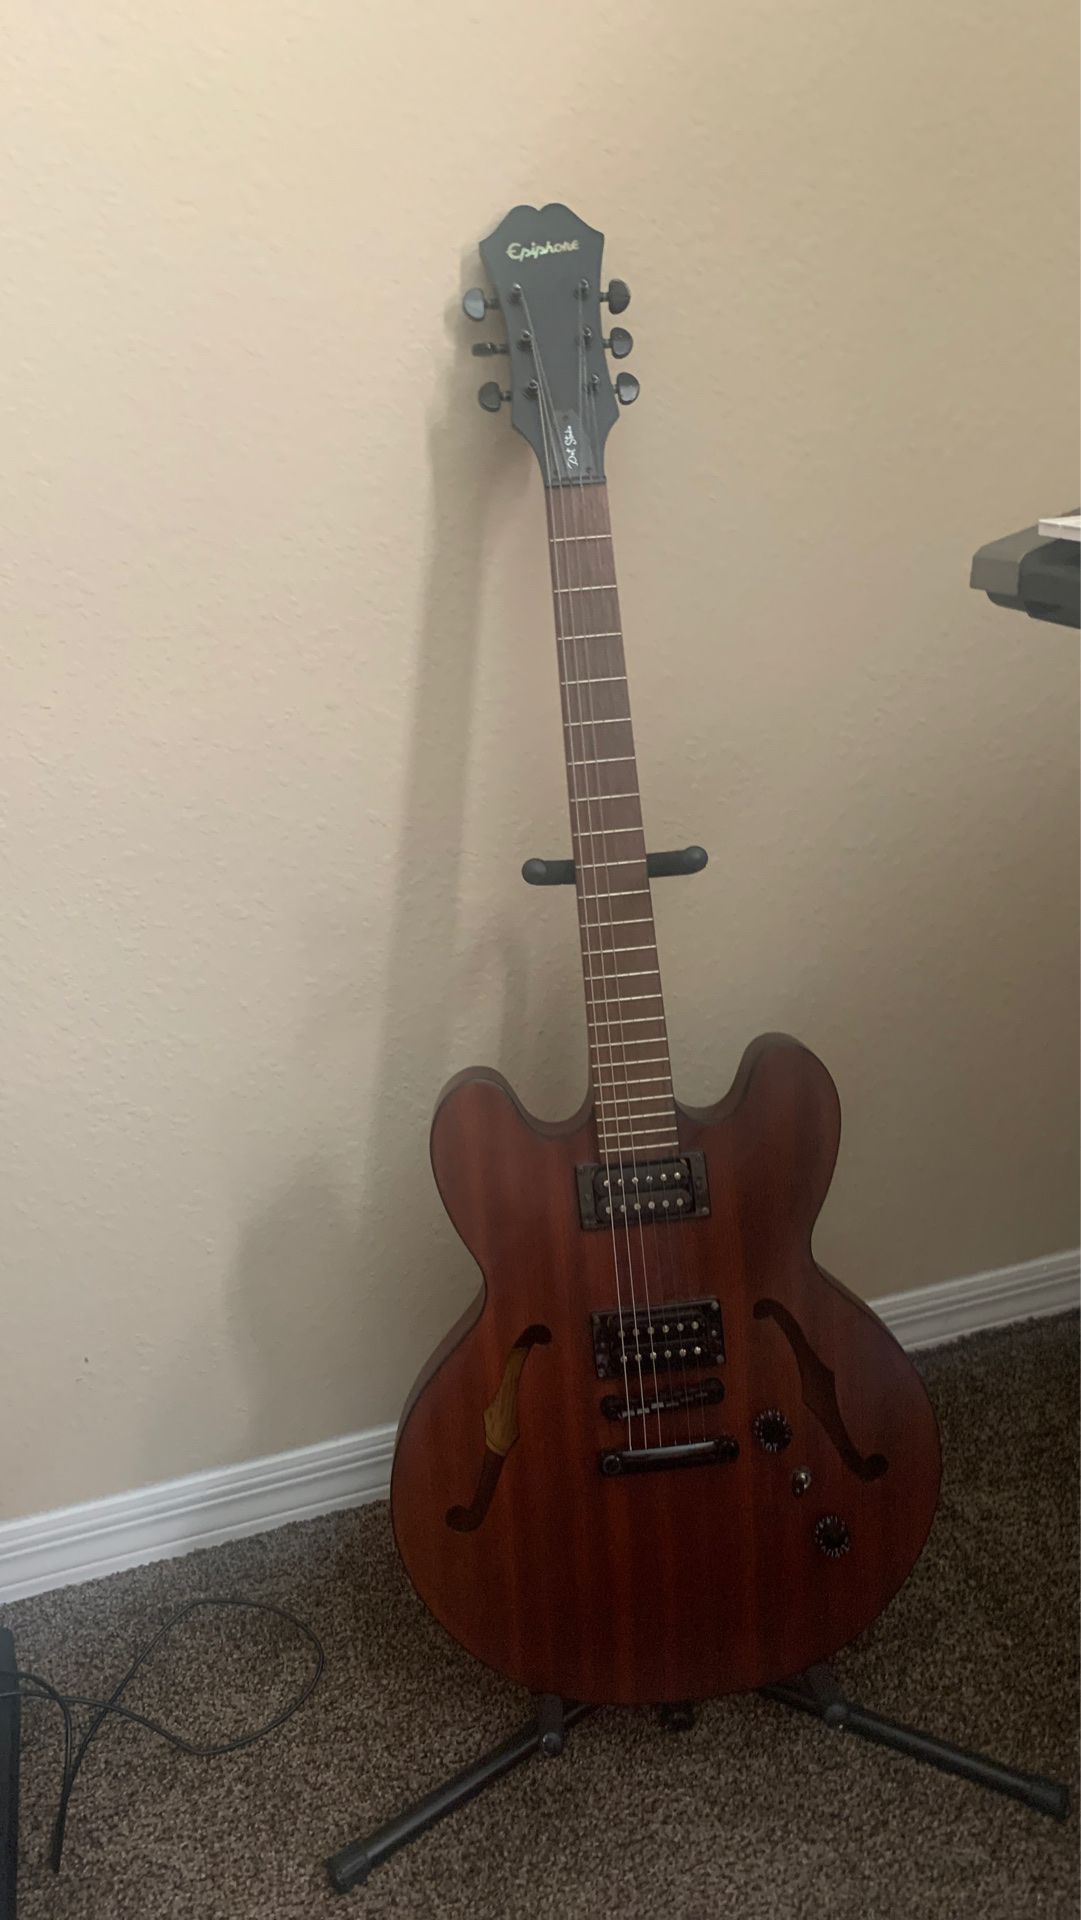 Epiphone studio electric guitar, not scratches works perfectly fine.